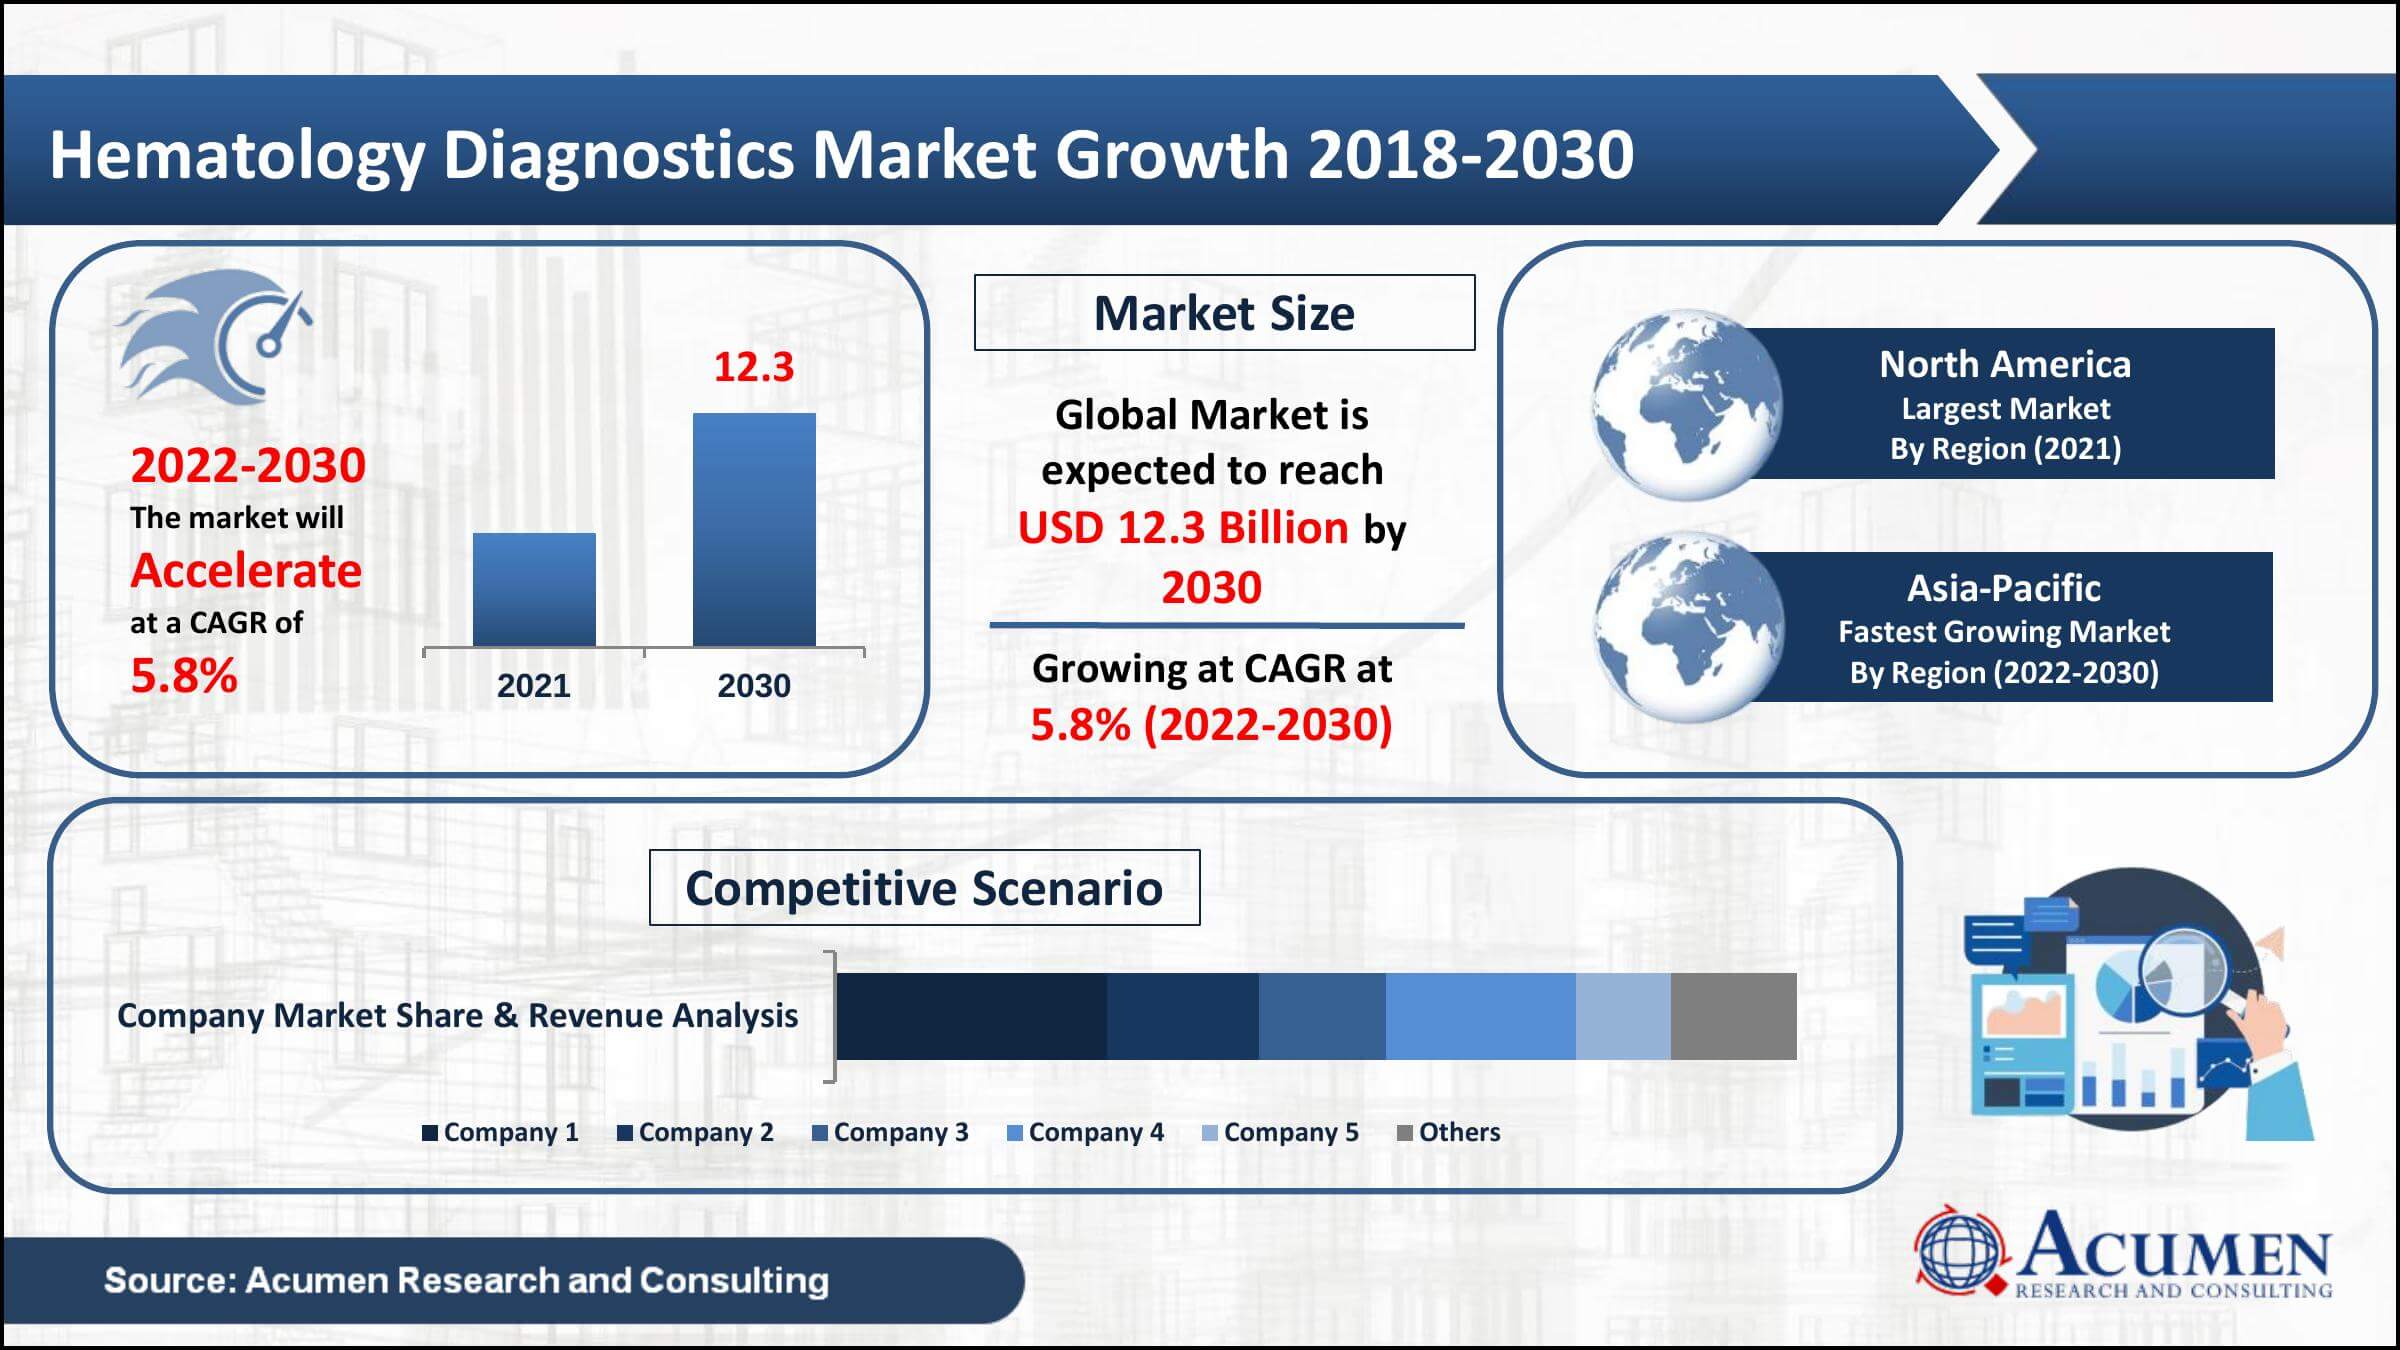 Global hematology diagnostics market value was worth USD 7.5 Billion in 2021, with a 5.8% CAGR from 2022 to 2030